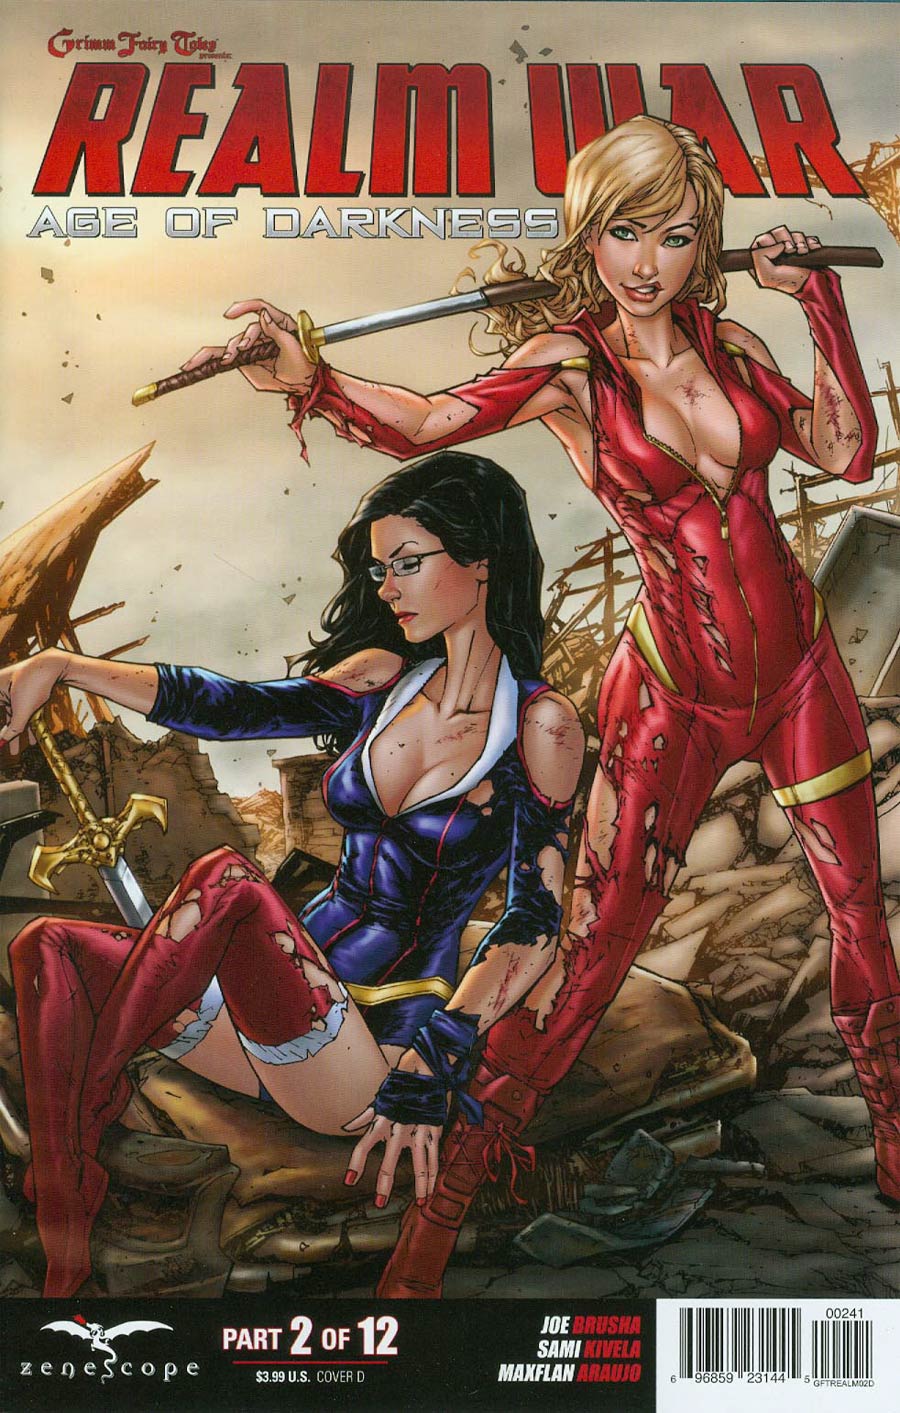 Grimm Fairy Tales Presents Realm War #2 Cover D Talent Caldwell (Age Of Darkness Tie-In)